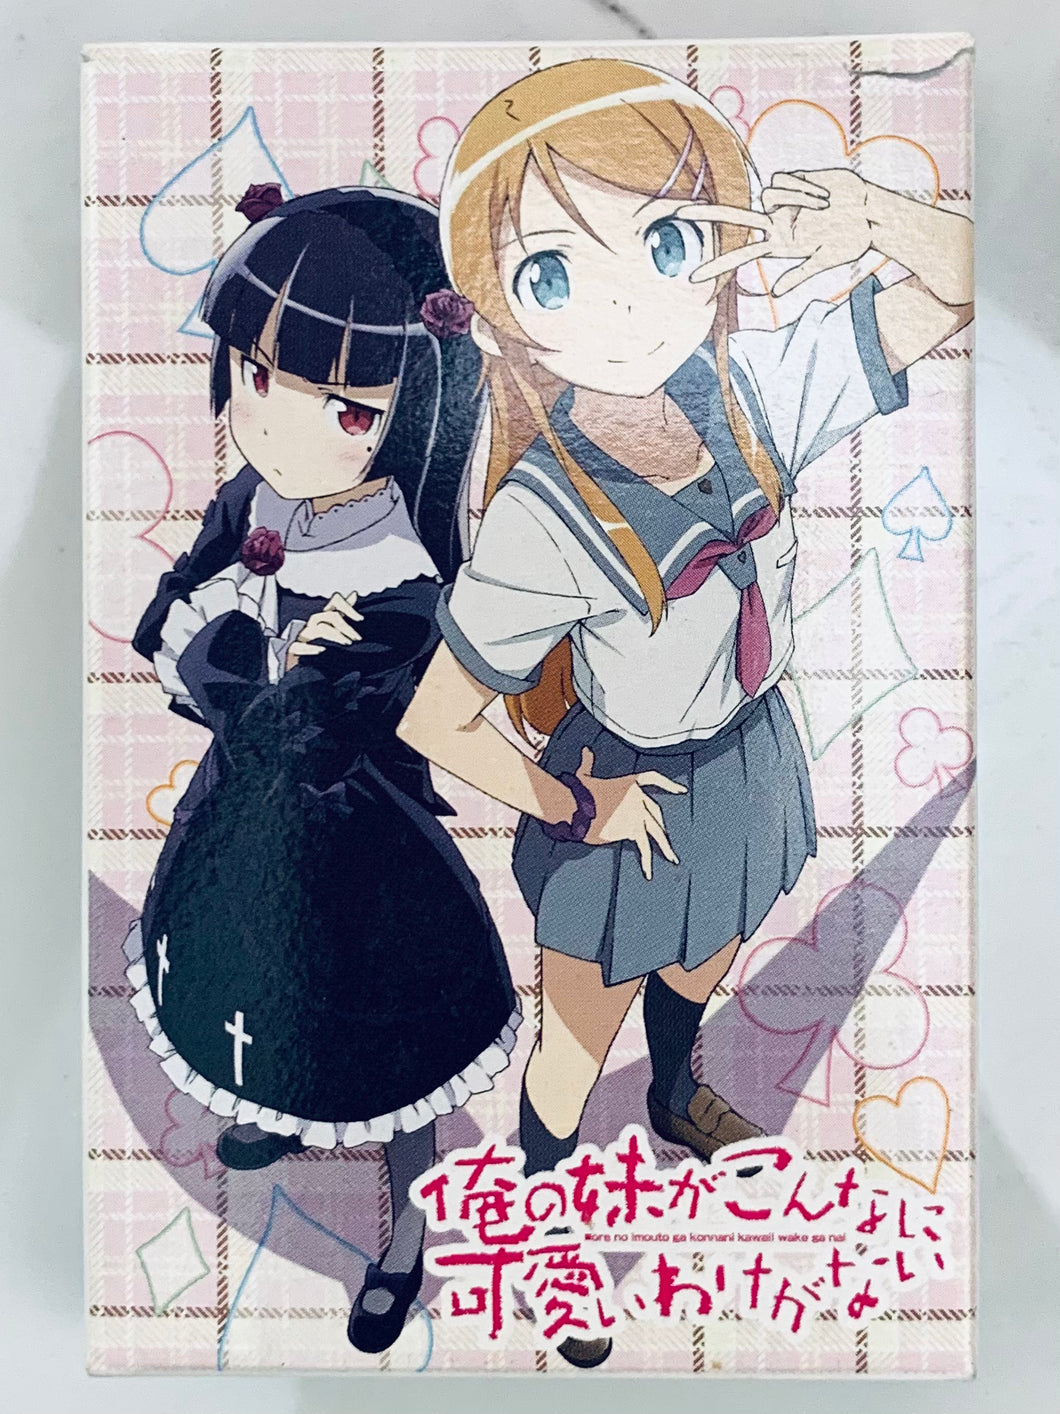 Oreimo / My sister can't be this cute Trump - Playing Cards - Dengeki Bunko Vol.25 May 2012 Appendix